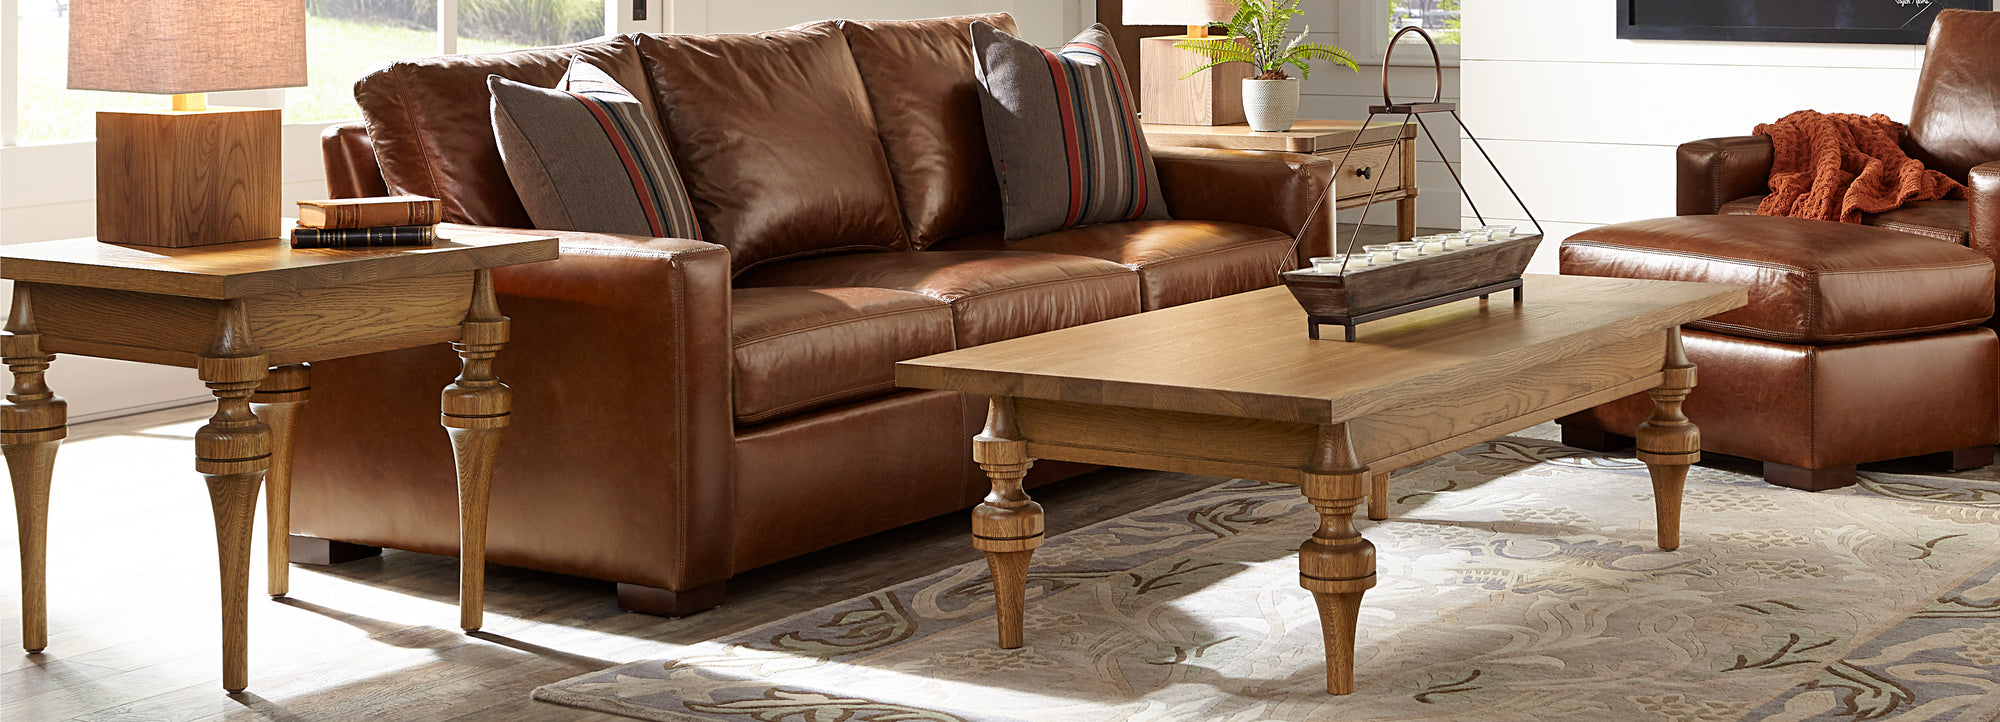 Stickley St. Lawrence collection coffee table and end table next to leather sofa and chair